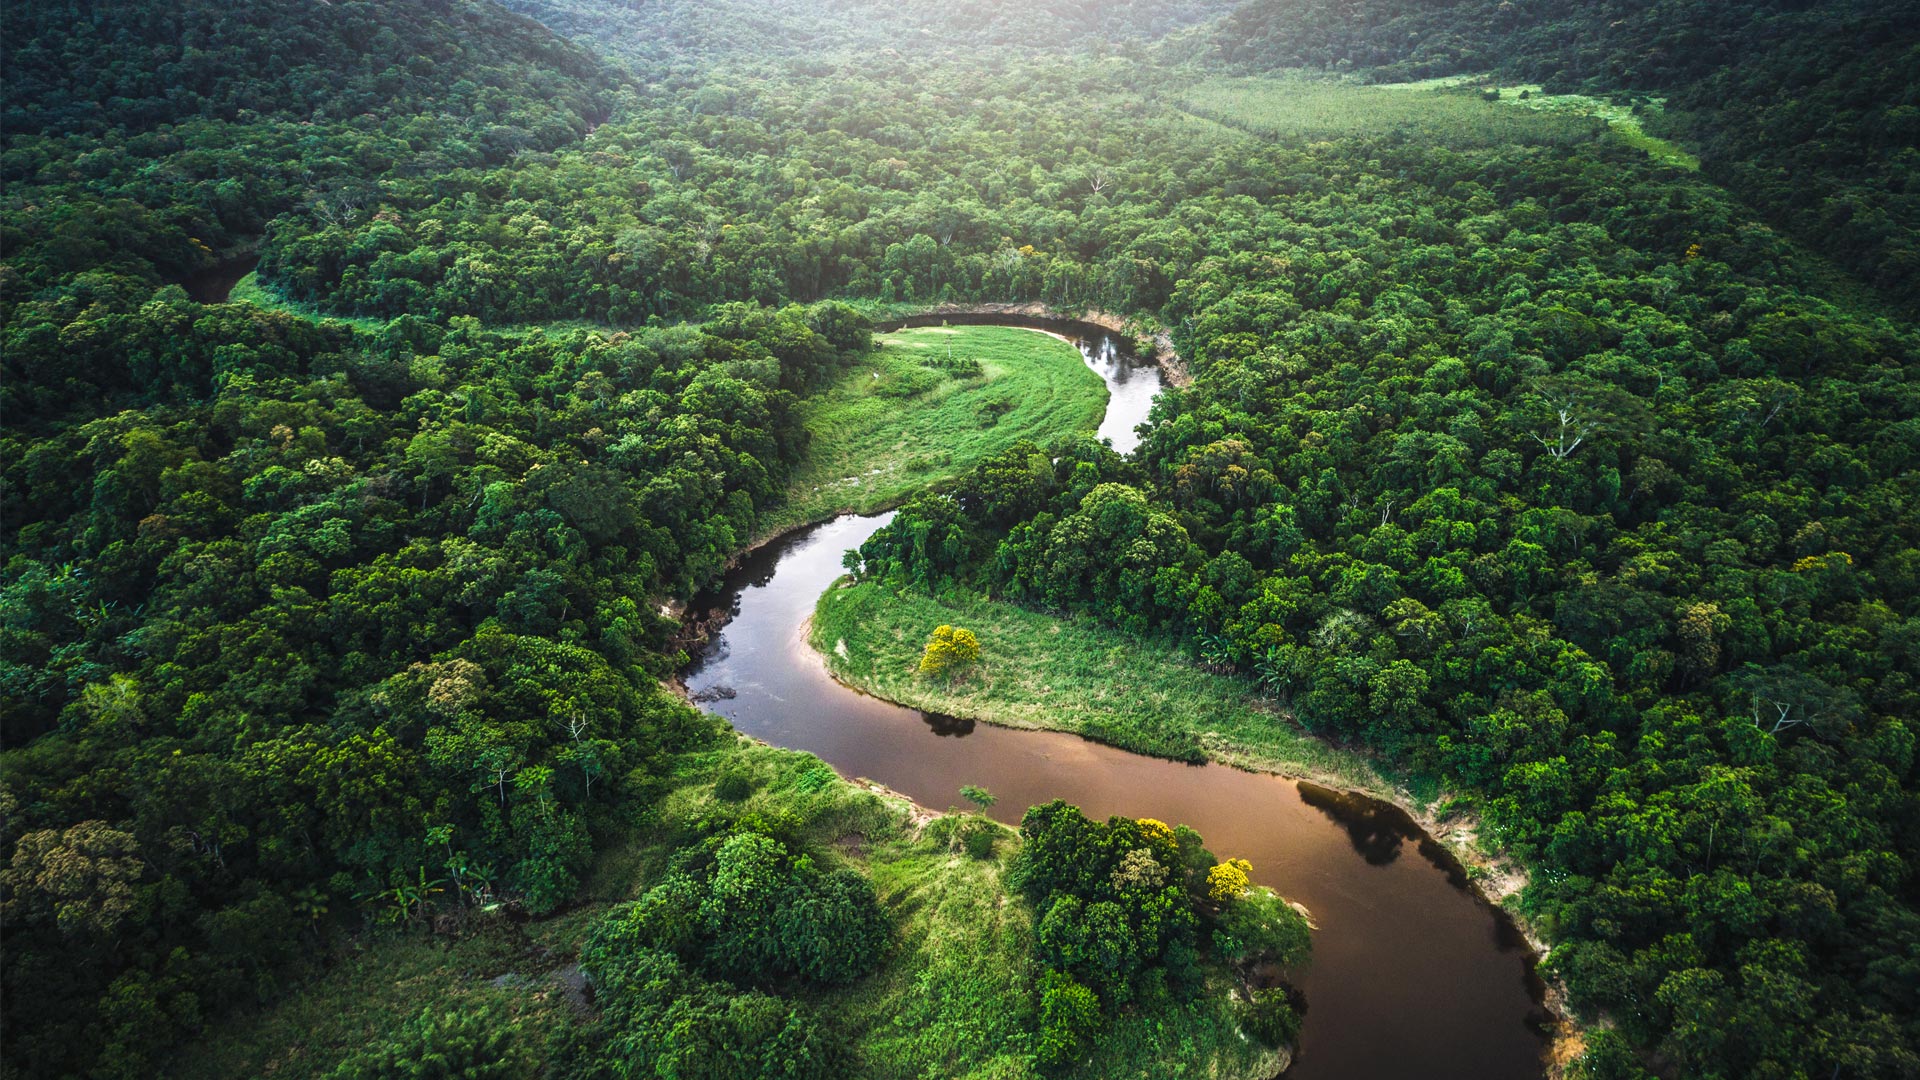 An image of the Amazon River and jungle